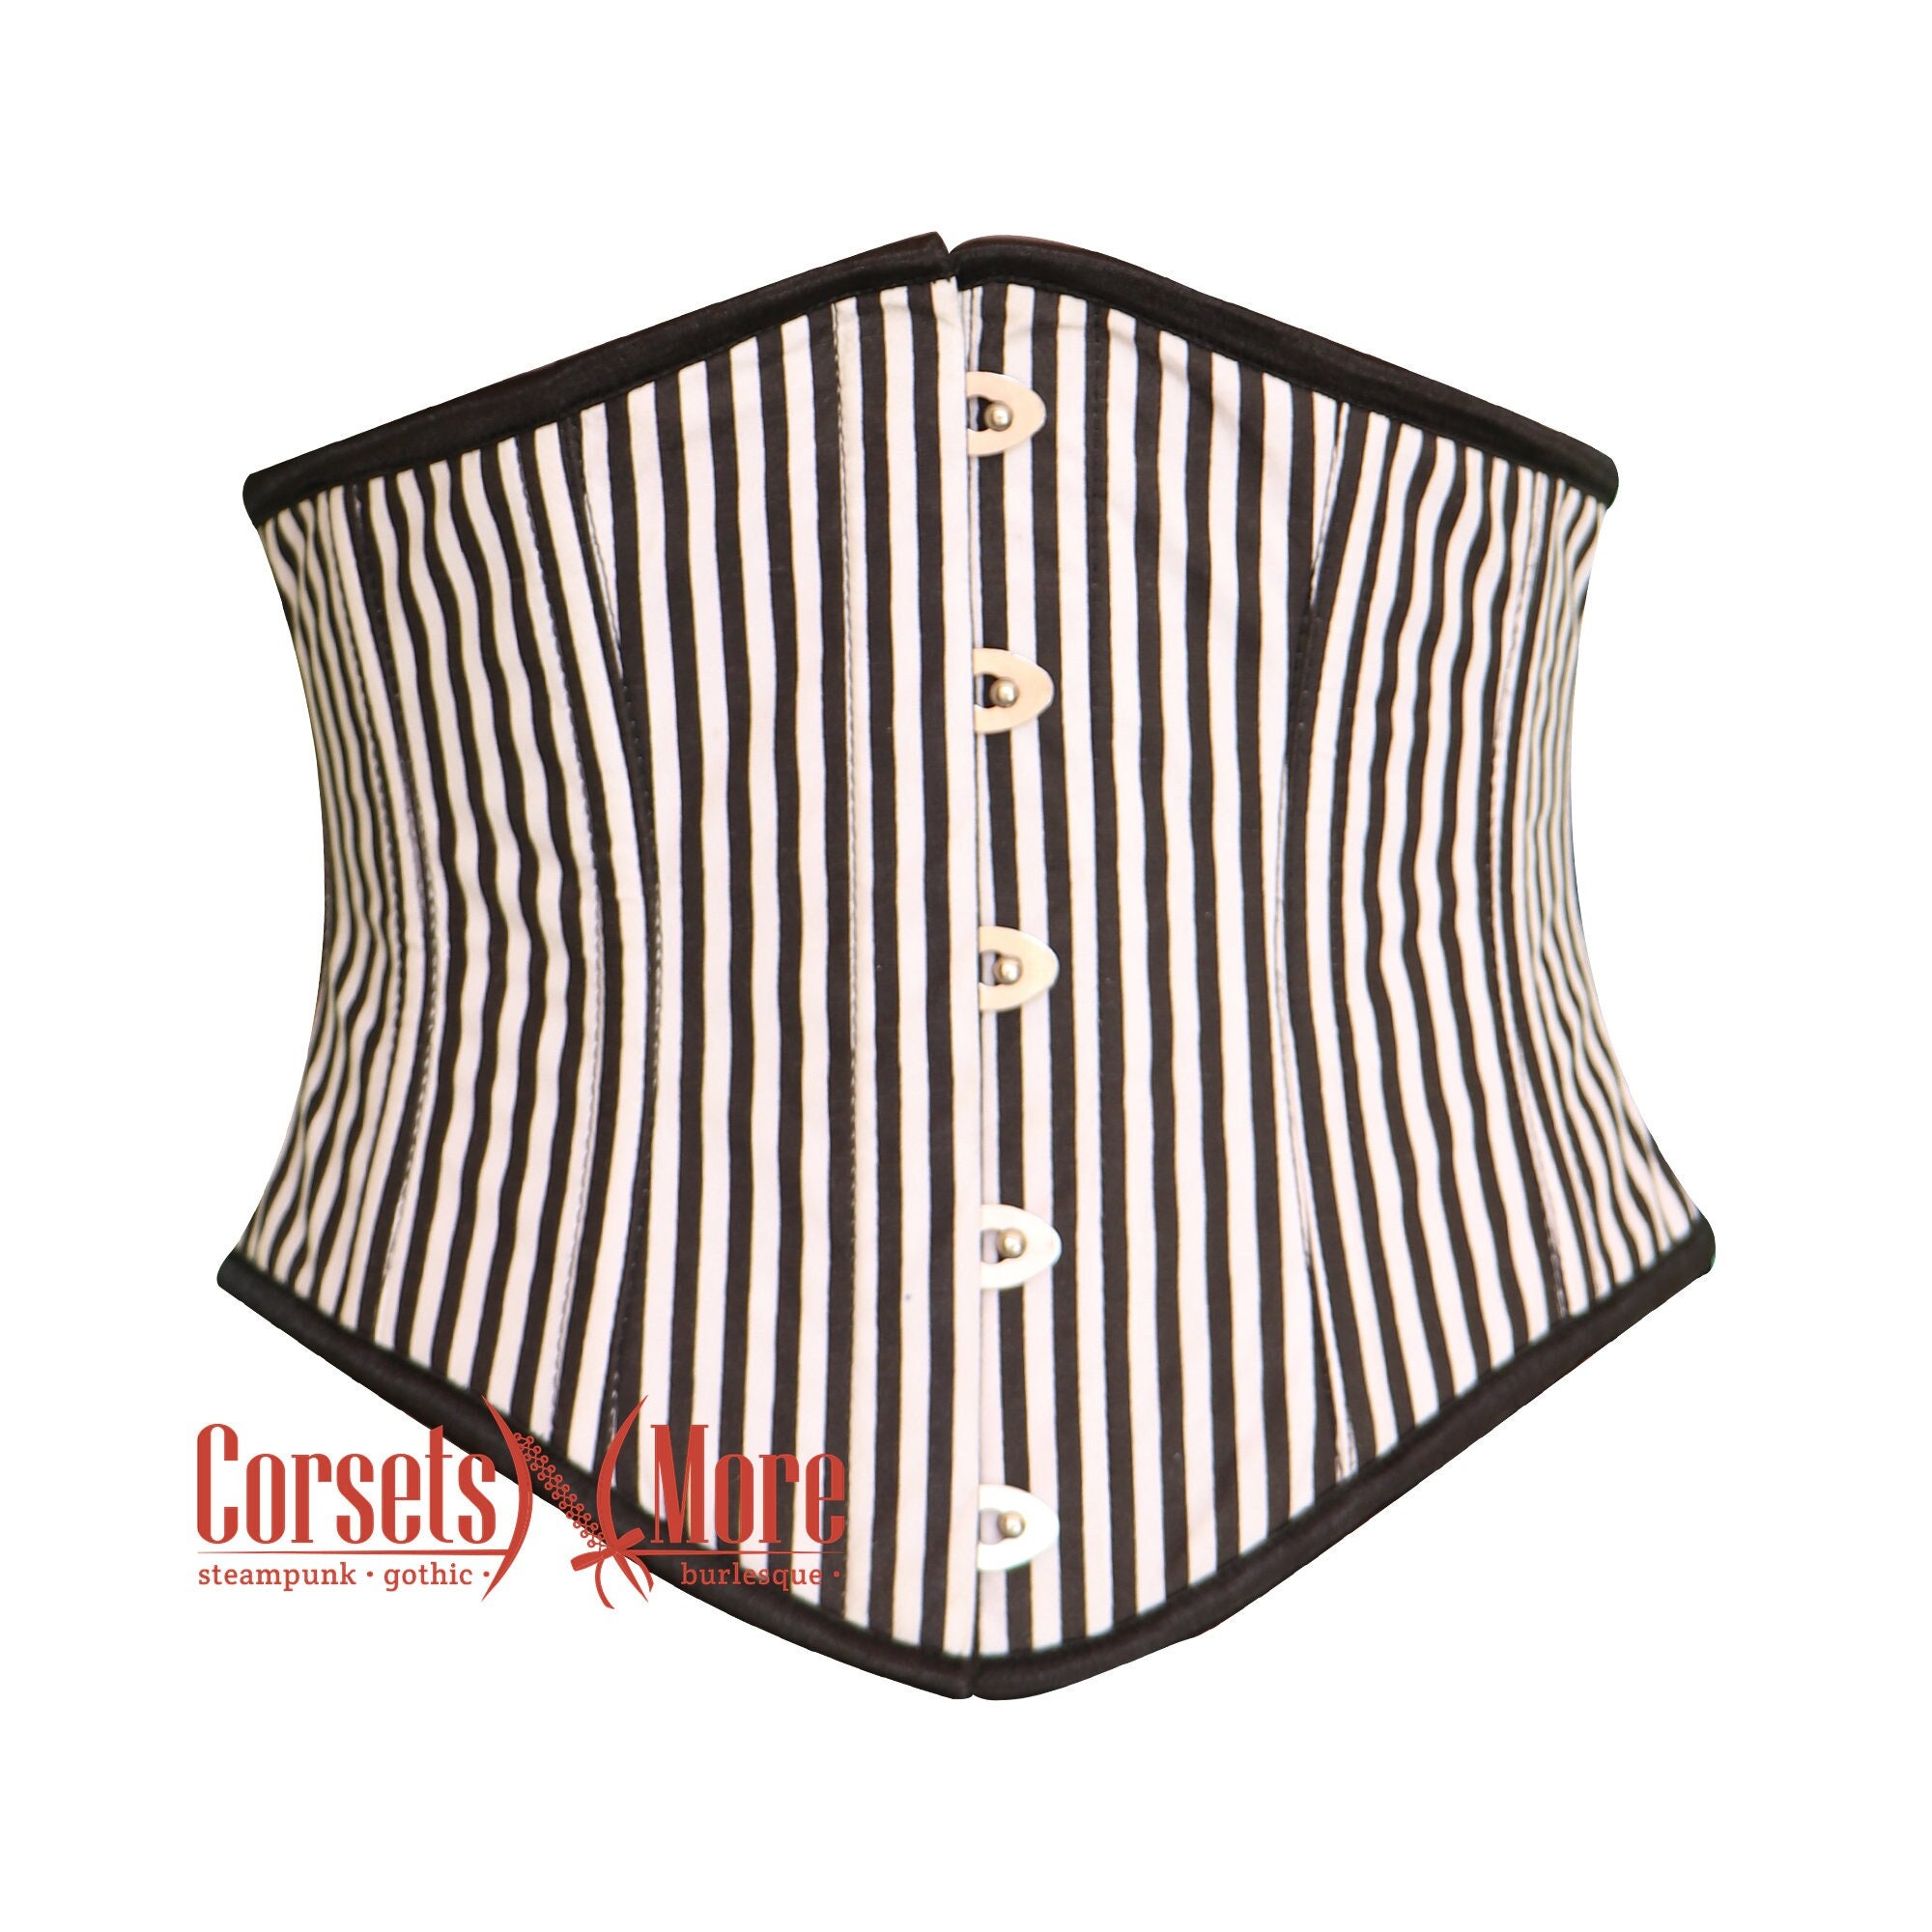 Black and White Stripes Poly Satin Underbust Basque Corset Costume Top 